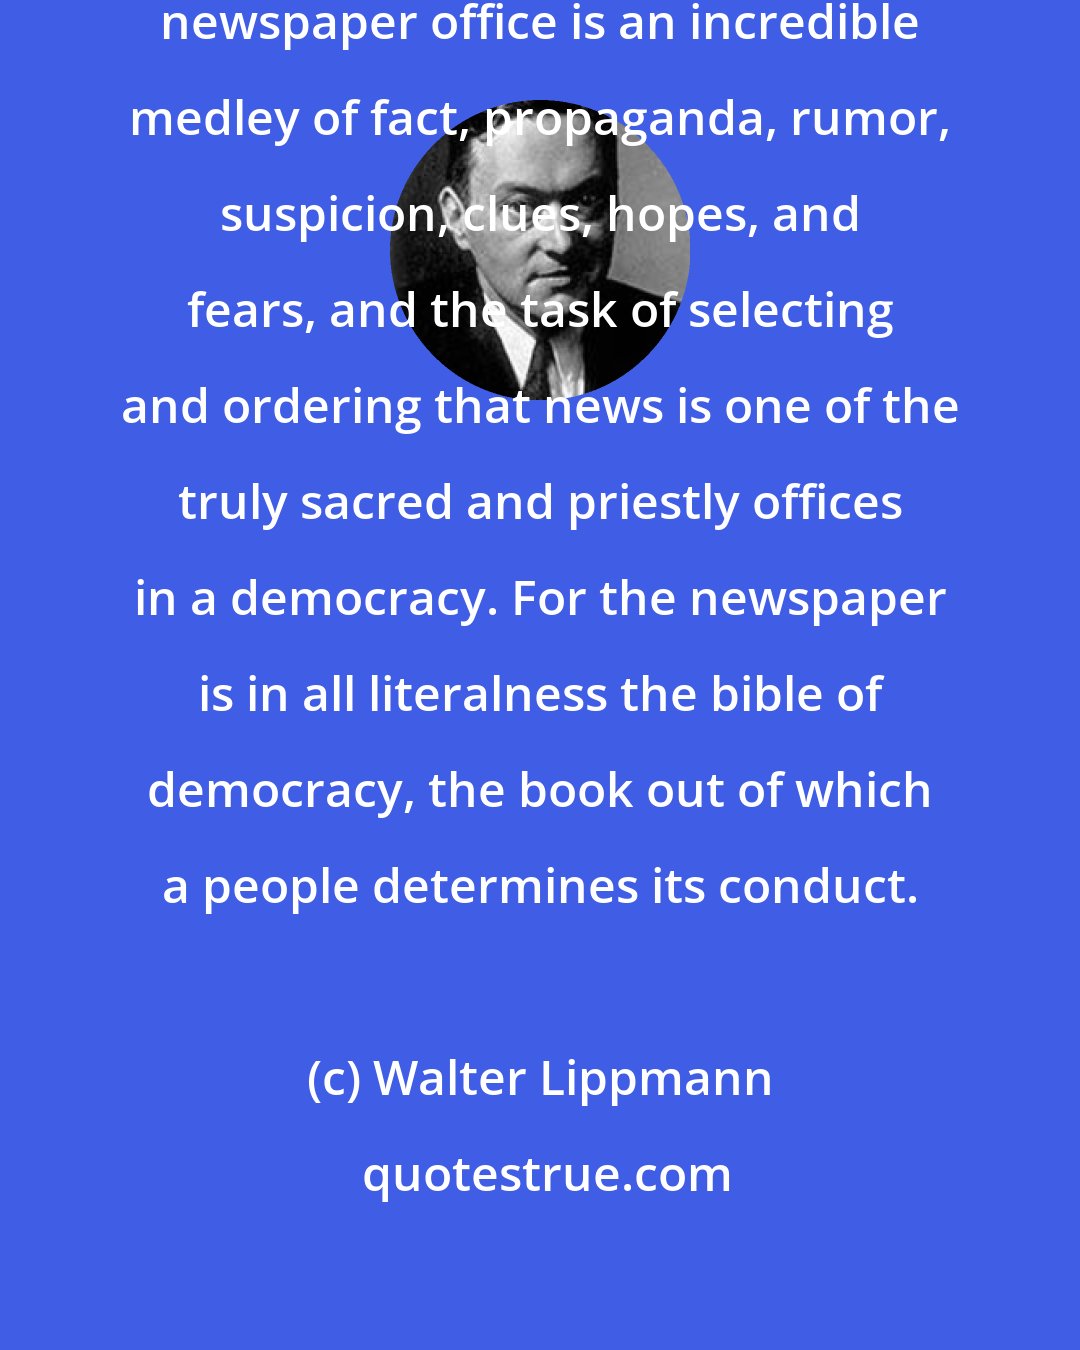 Walter Lippmann: The news of the days it reaches the newspaper office is an incredible medley of fact, propaganda, rumor, suspicion, clues, hopes, and fears, and the task of selecting and ordering that news is one of the truly sacred and priestly offices in a democracy. For the newspaper is in all literalness the bible of democracy, the book out of which a people determines its conduct.